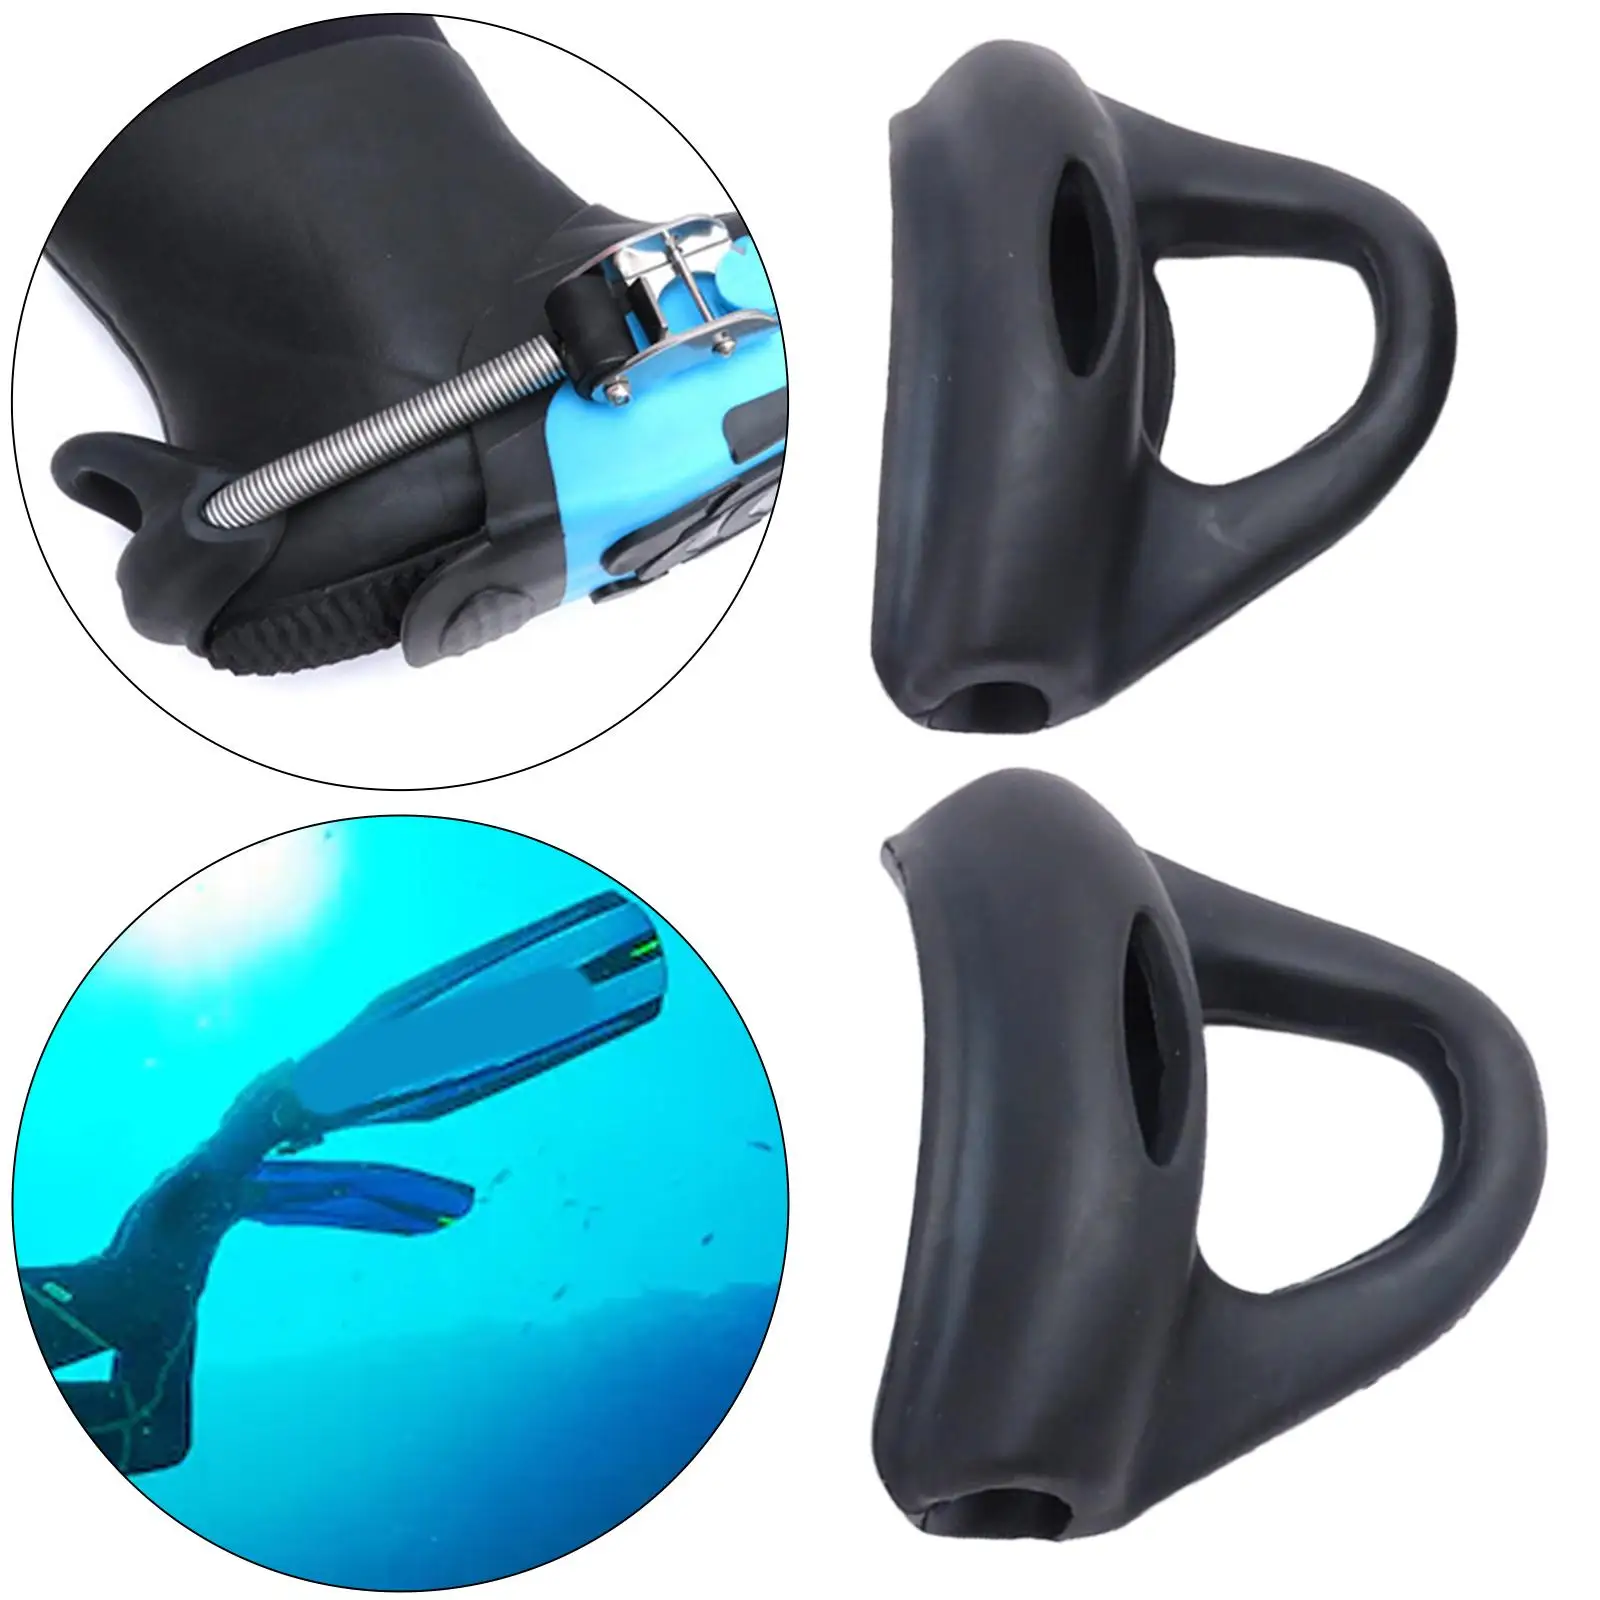 Comfortable Scuba Diving Strap Heel Parts Shoe Lace Heel for Canoeing, Water Sports